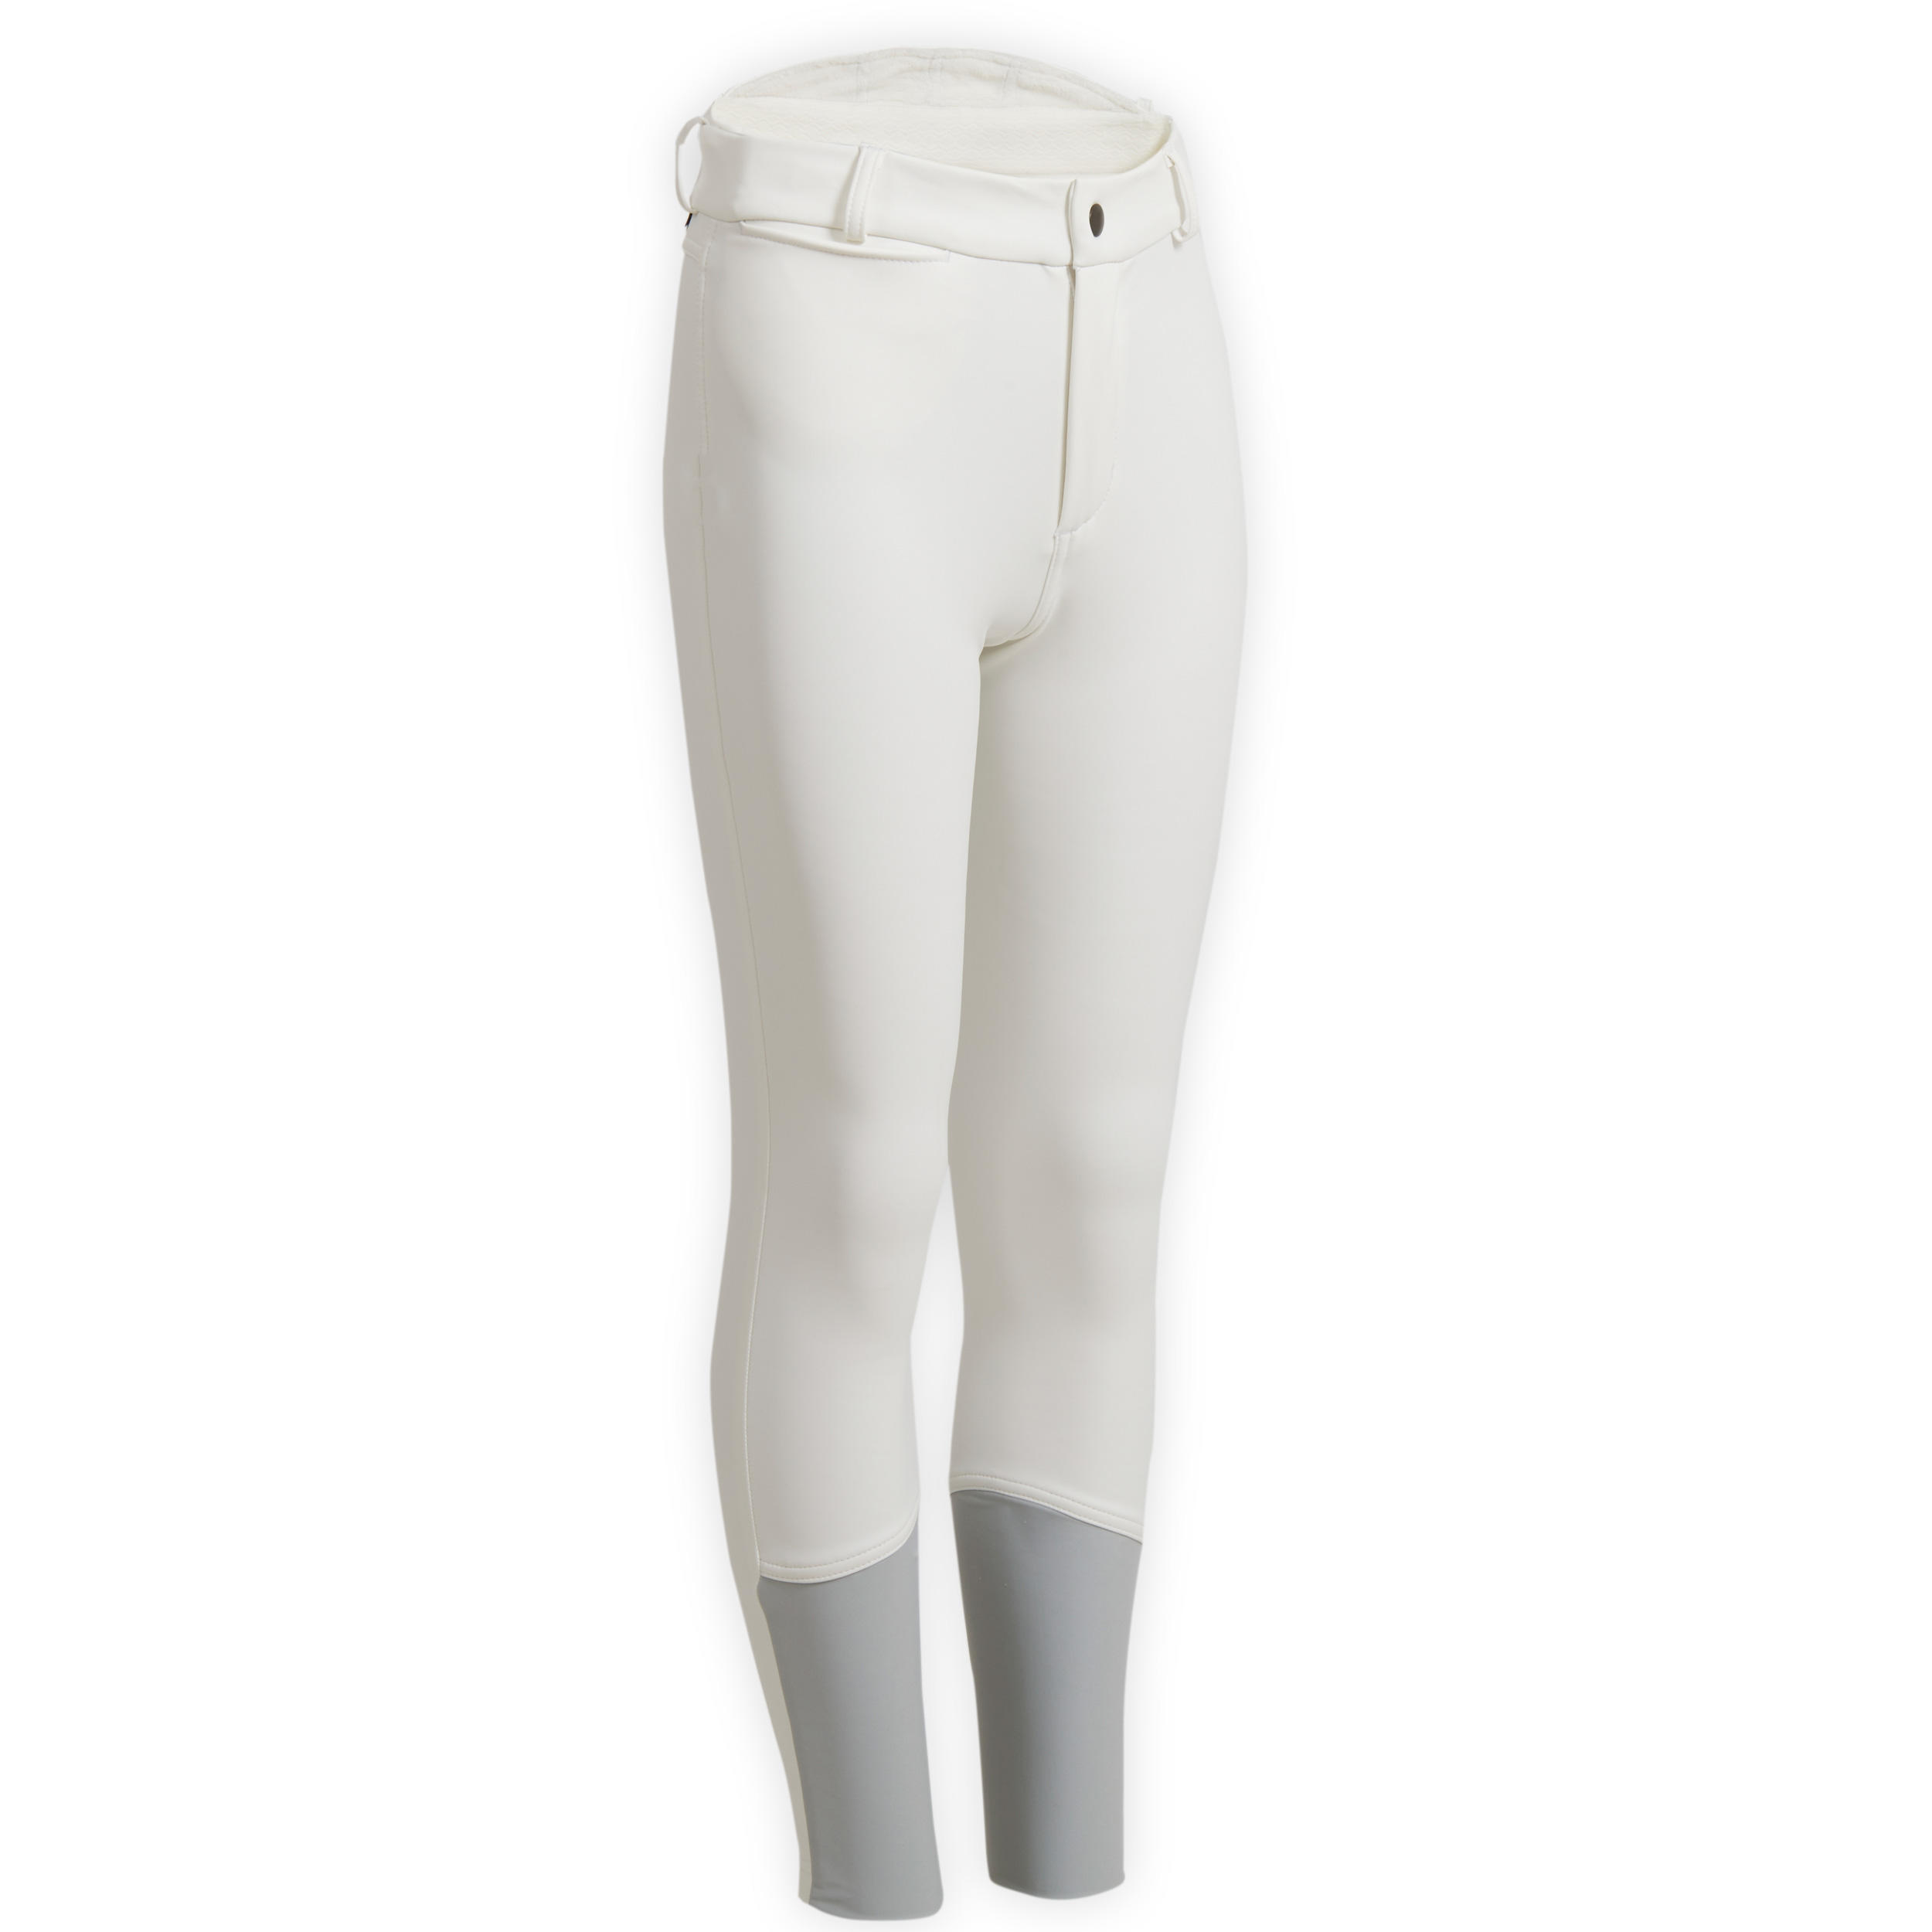 FOUGANZA Kids' Horse Riding Warm and Water Repellent Competition Jodhpurs 500 Kipwarm - White